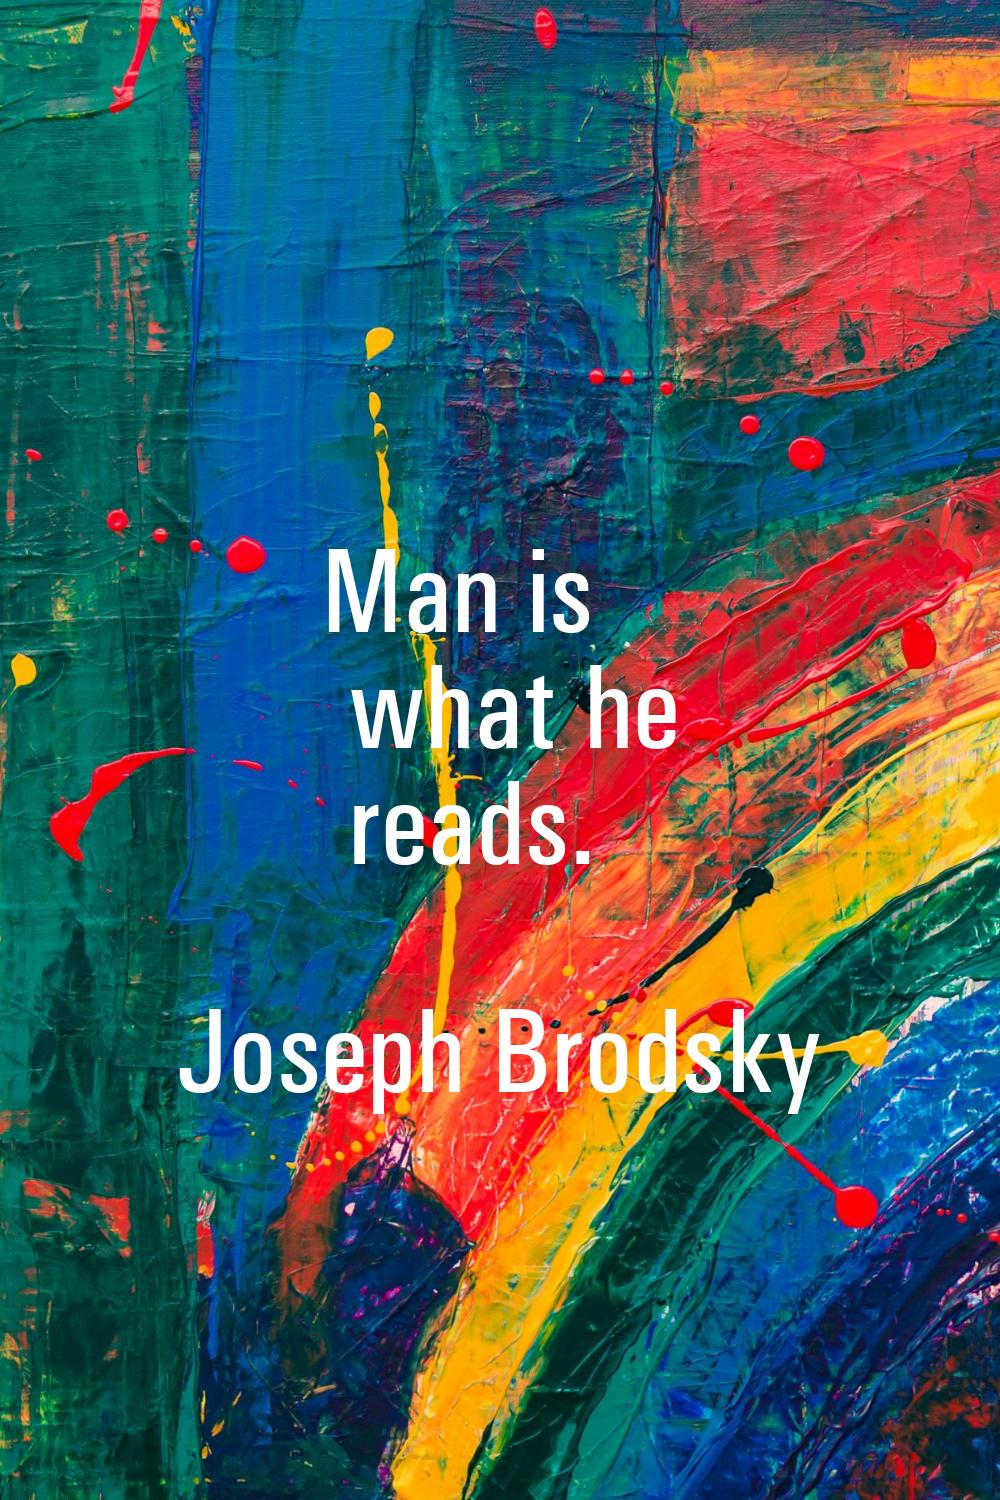 Man is what he reads.